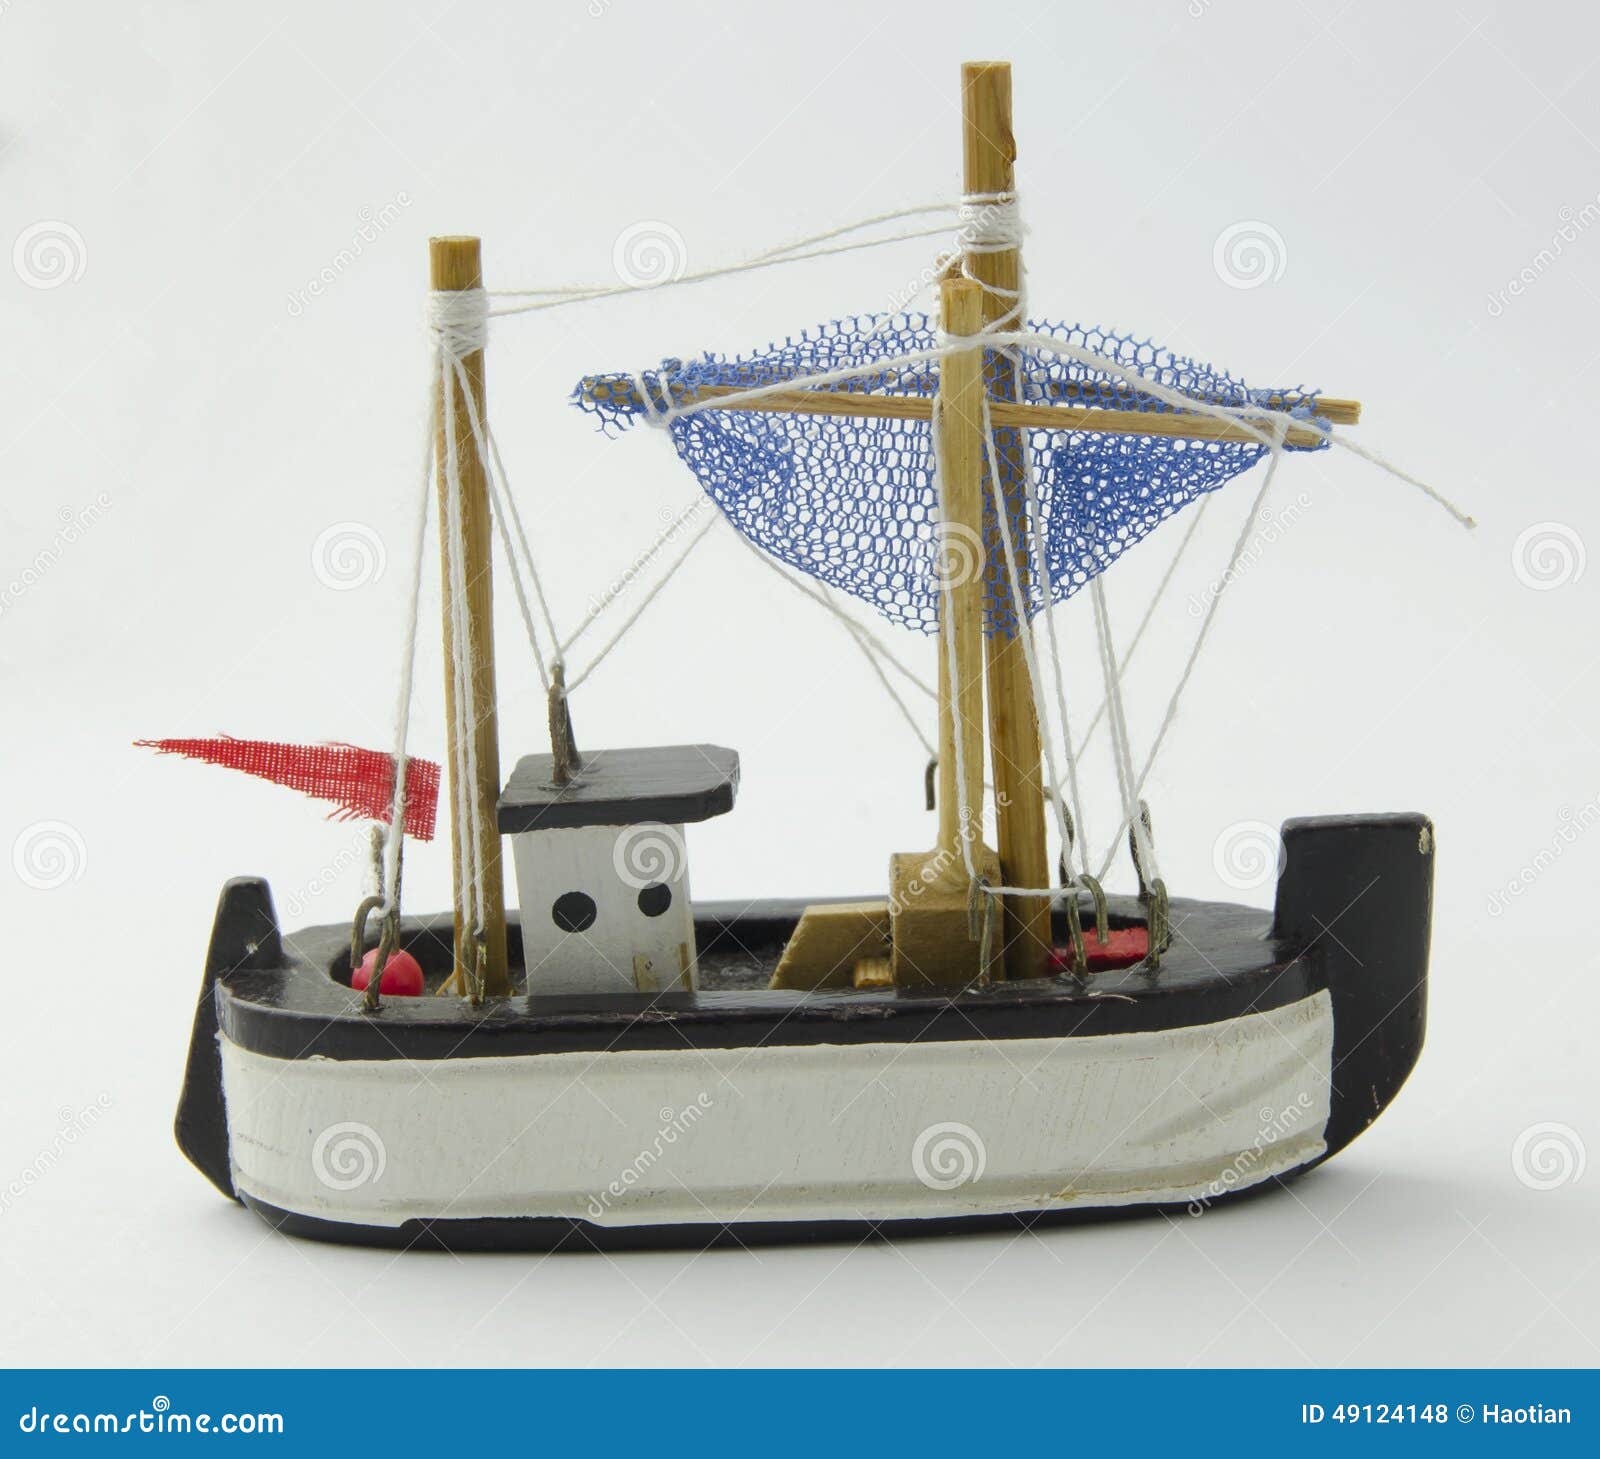 Wooden toy fishing boat stock photo. Image of mediterranean - 49124148